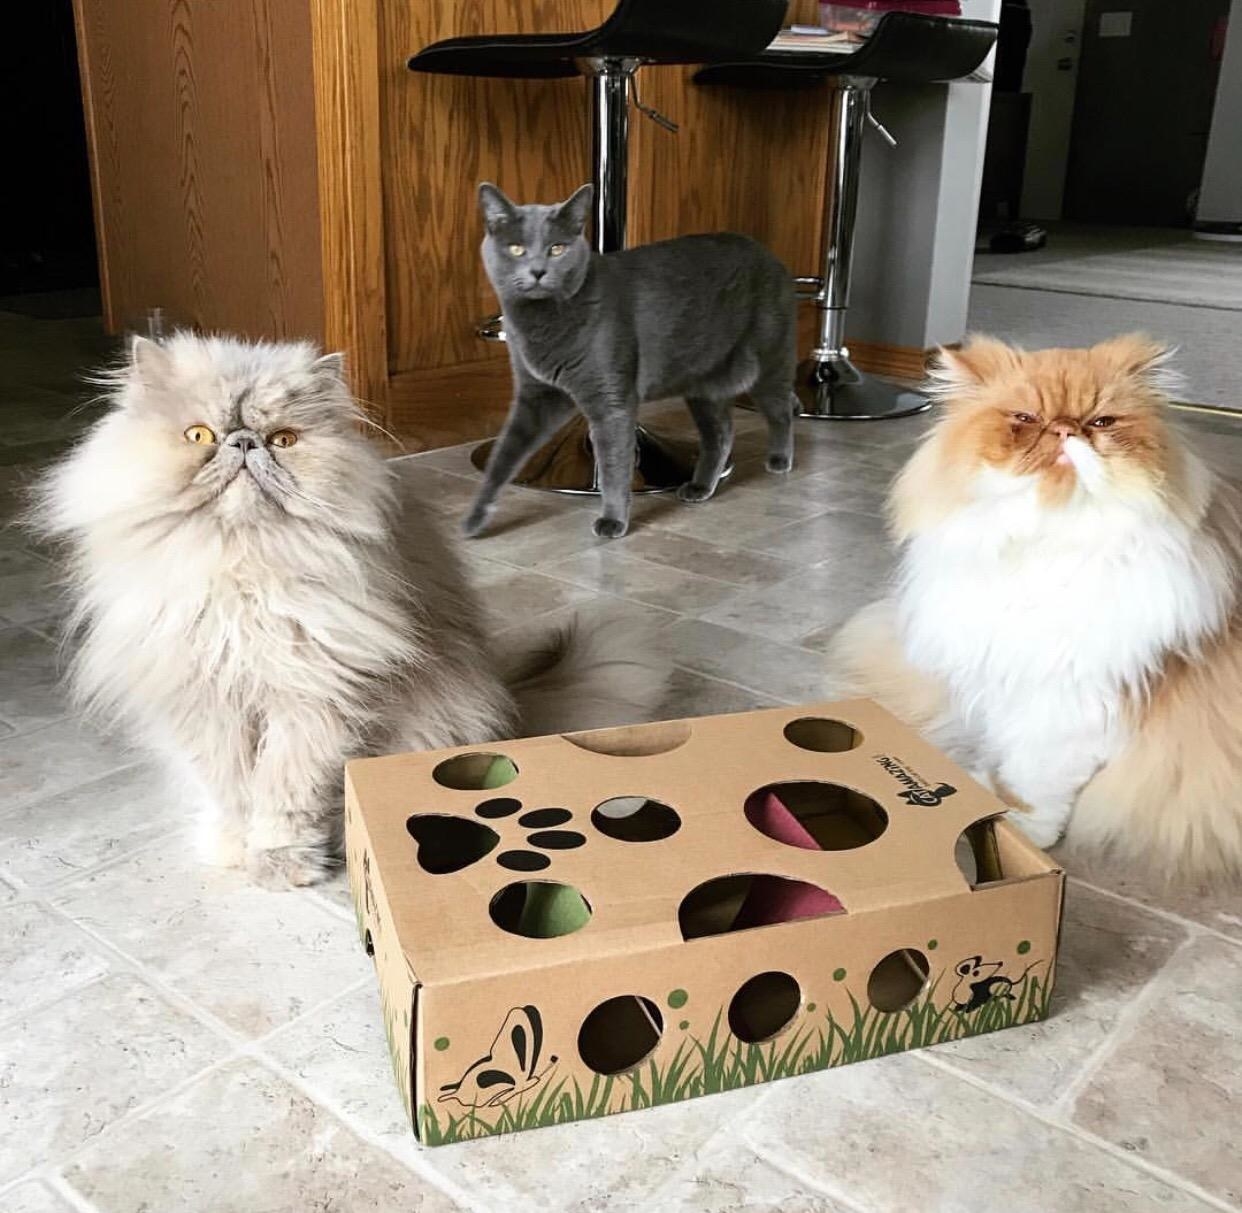 Reviewer image of three cats sitting next to cardboard maze toy